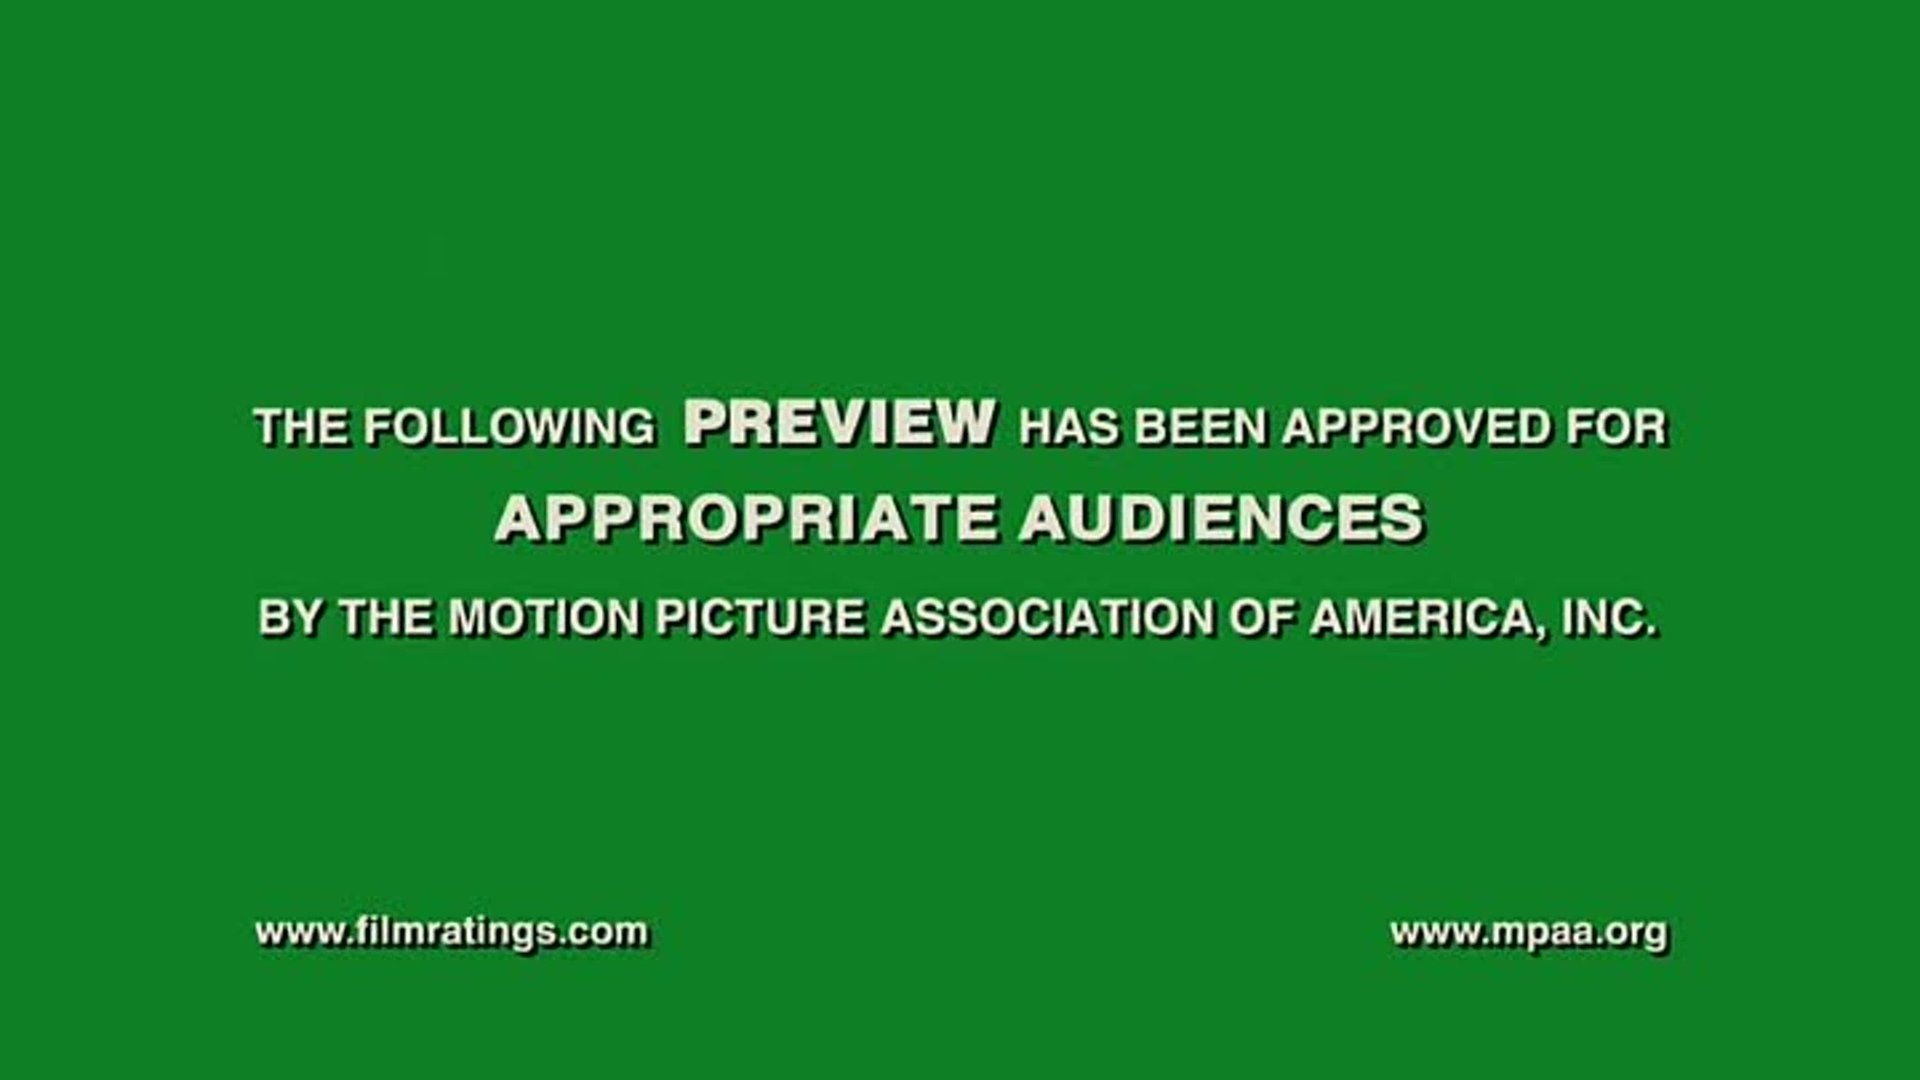 The following Preview has been approved for all audiences by the Motion picture Association of America. The following Preview has been approved. The following Preview has been approved for all audiences PG 13. Appropriate audiences